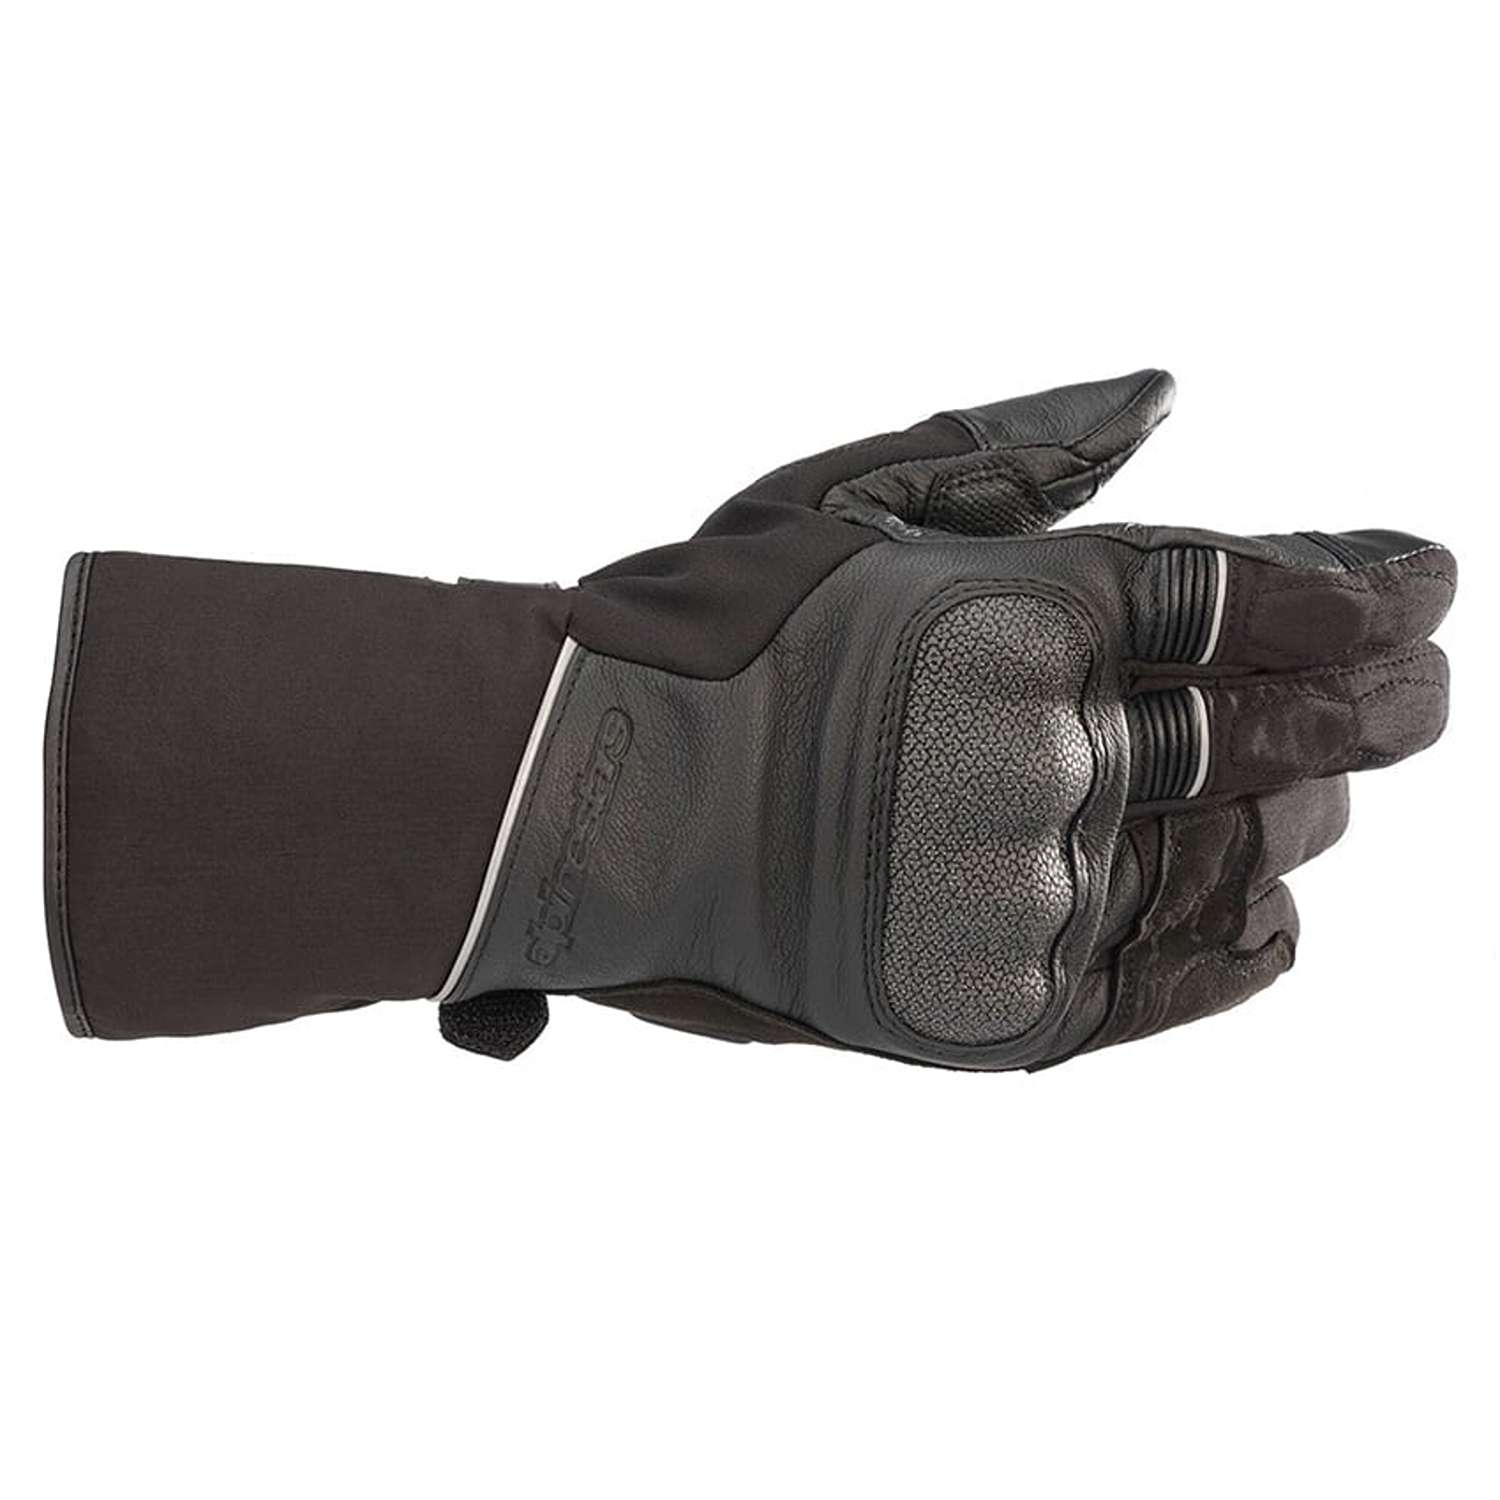 Image of EU Alpinestars Wr-2 V2 Gore-Tex Gloves With Gore Grip Technology Black Taille M